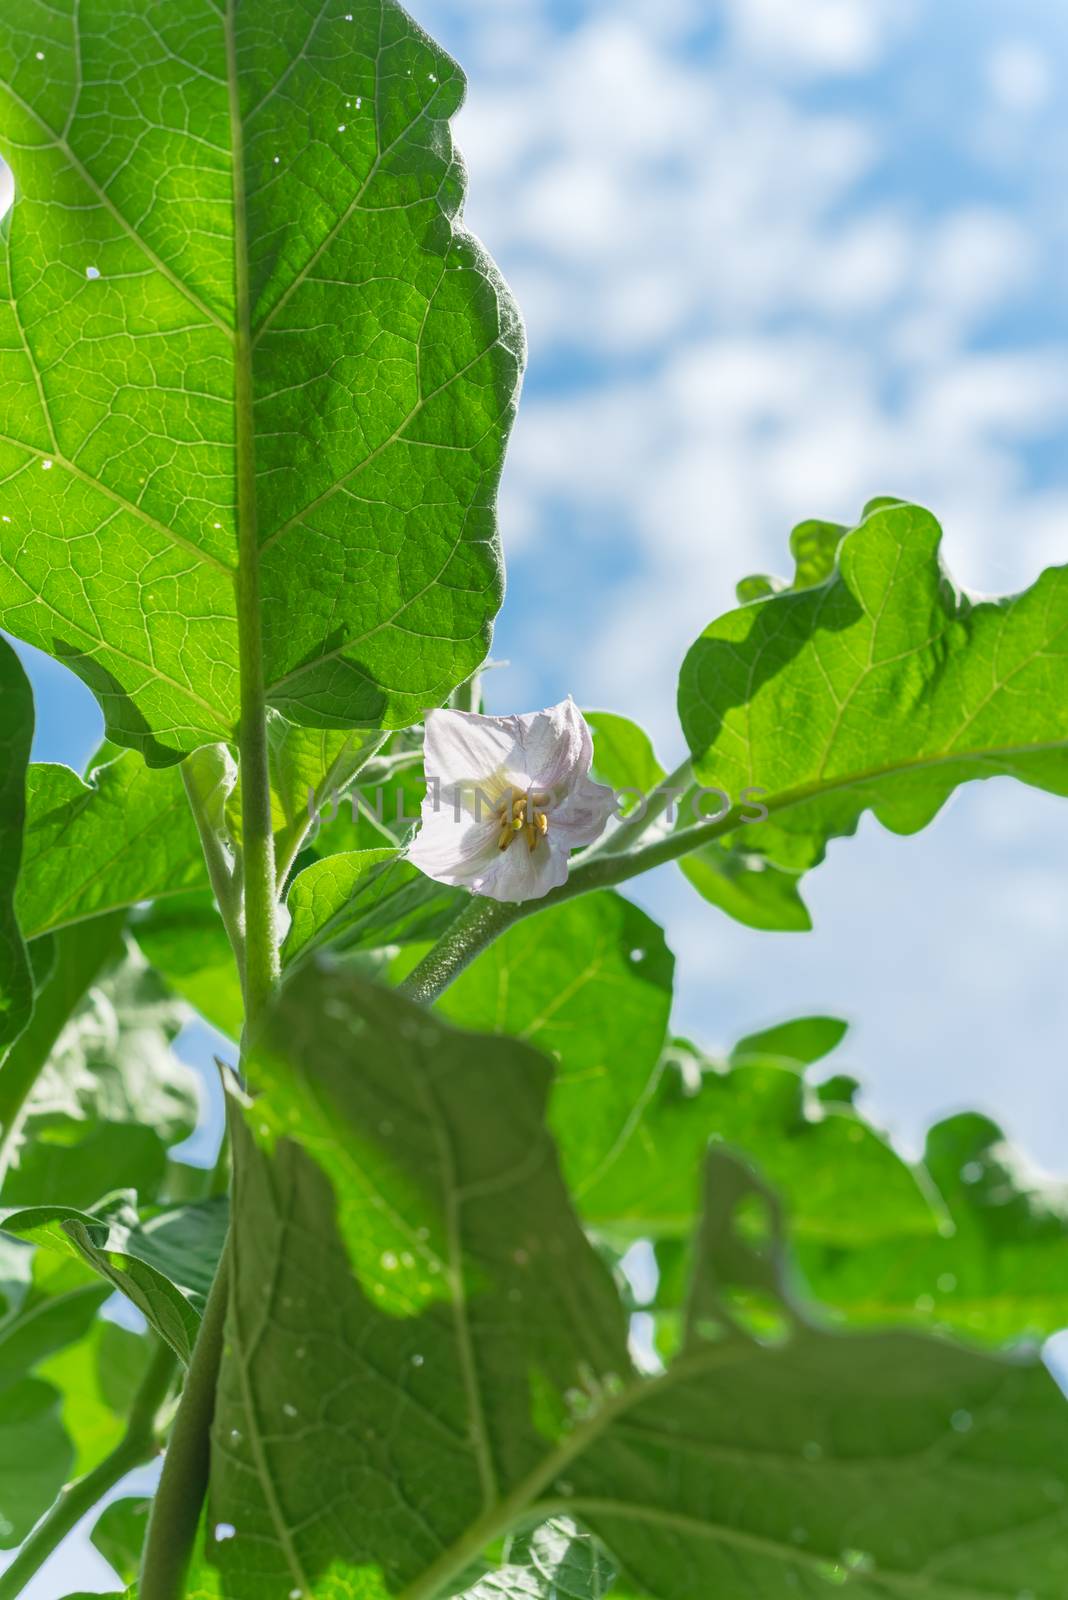 Lookup view of blossom purple eggplant flowers at homegrown garden near Dallas, Texas, USA by trongnguyen